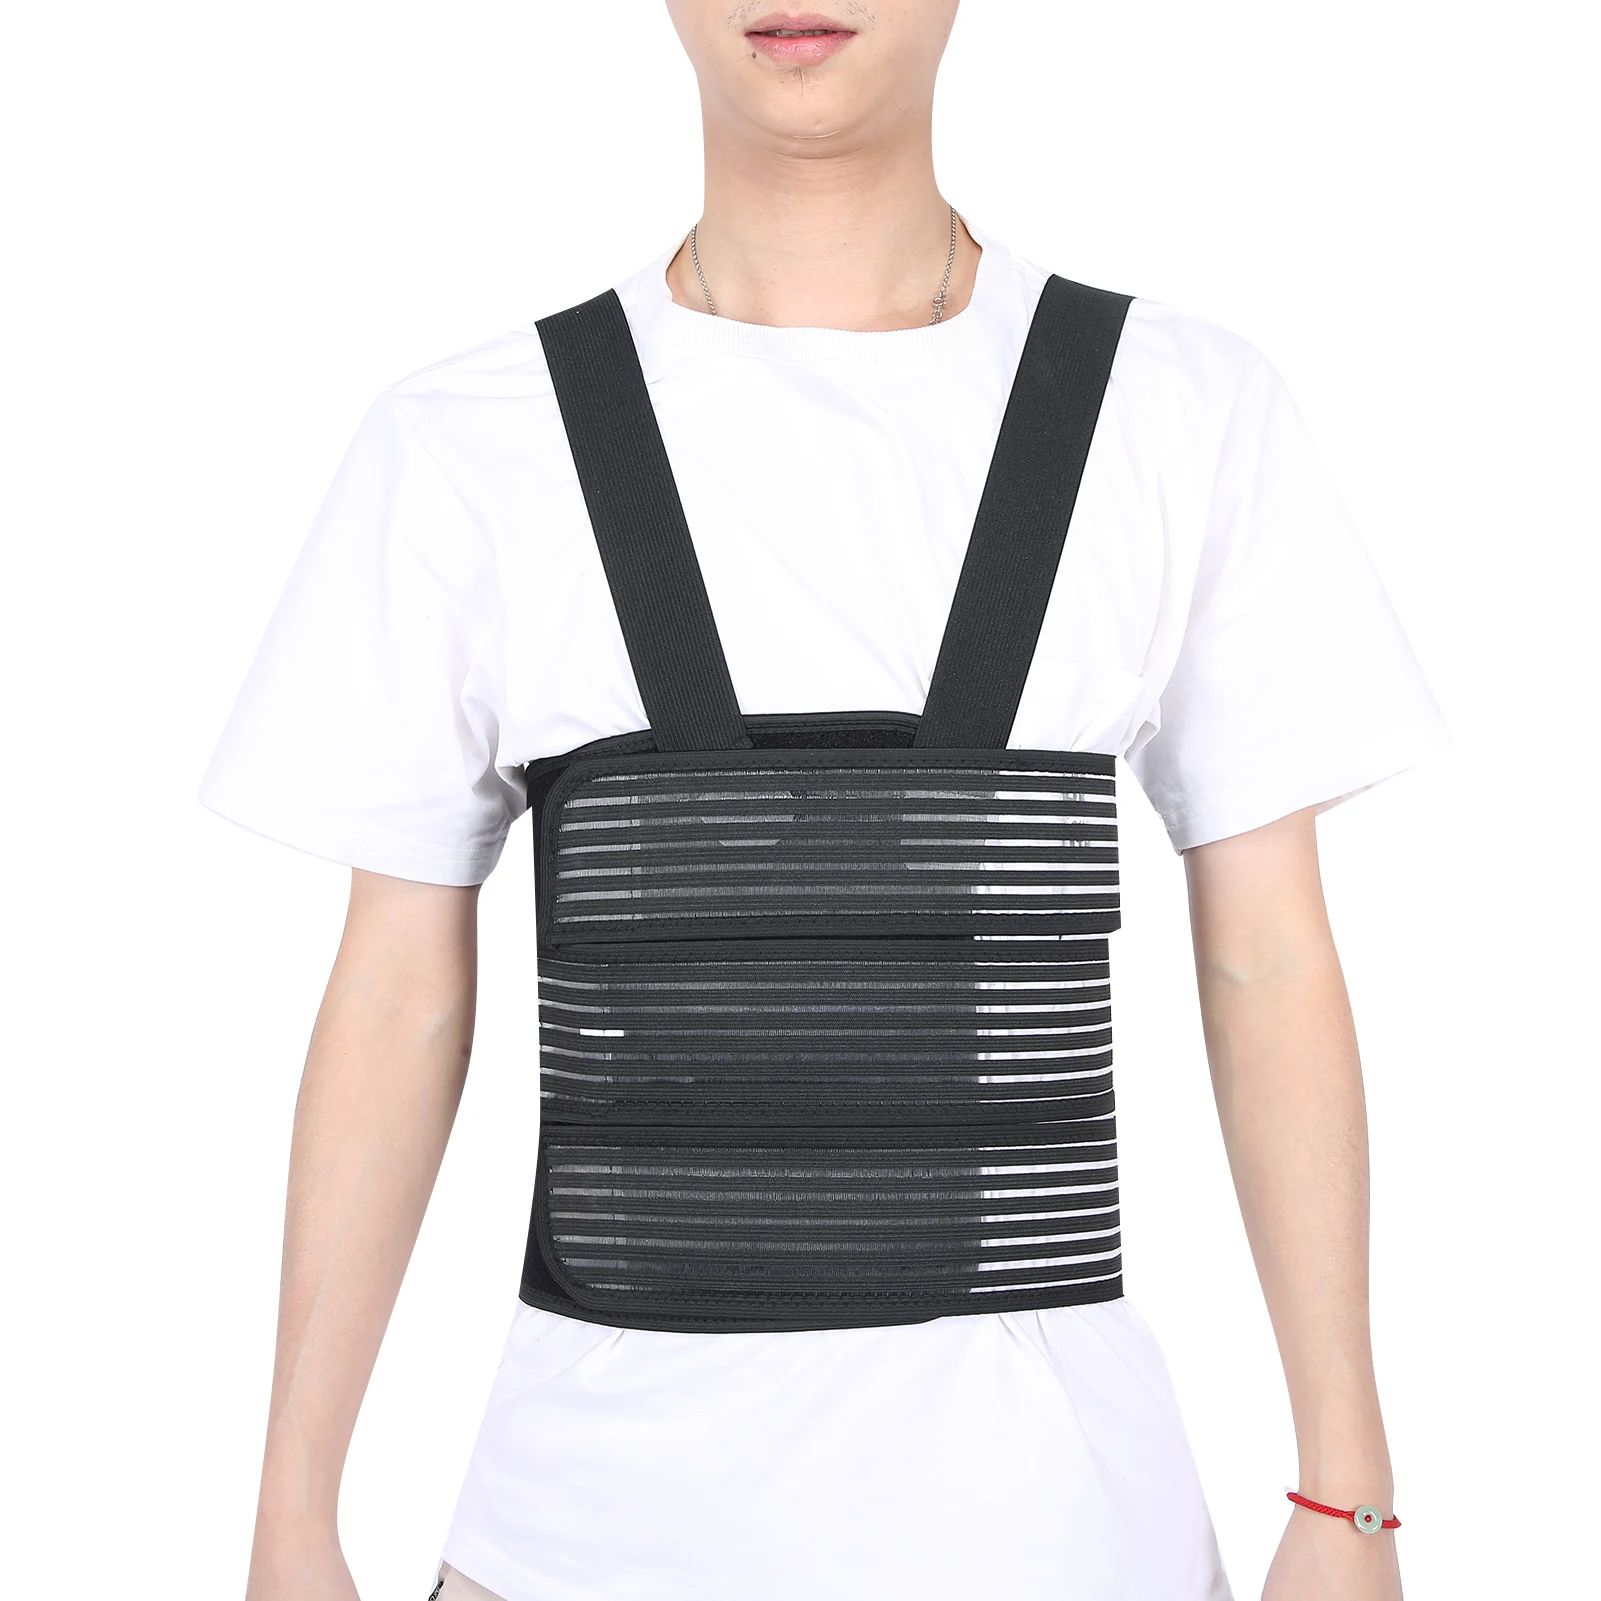 

Medical Chest Thoracolumbar Support Brace Adjustable Lumbar Protector Strap Relieve Pain Rib Fracture Rehabilitation Stabilizer